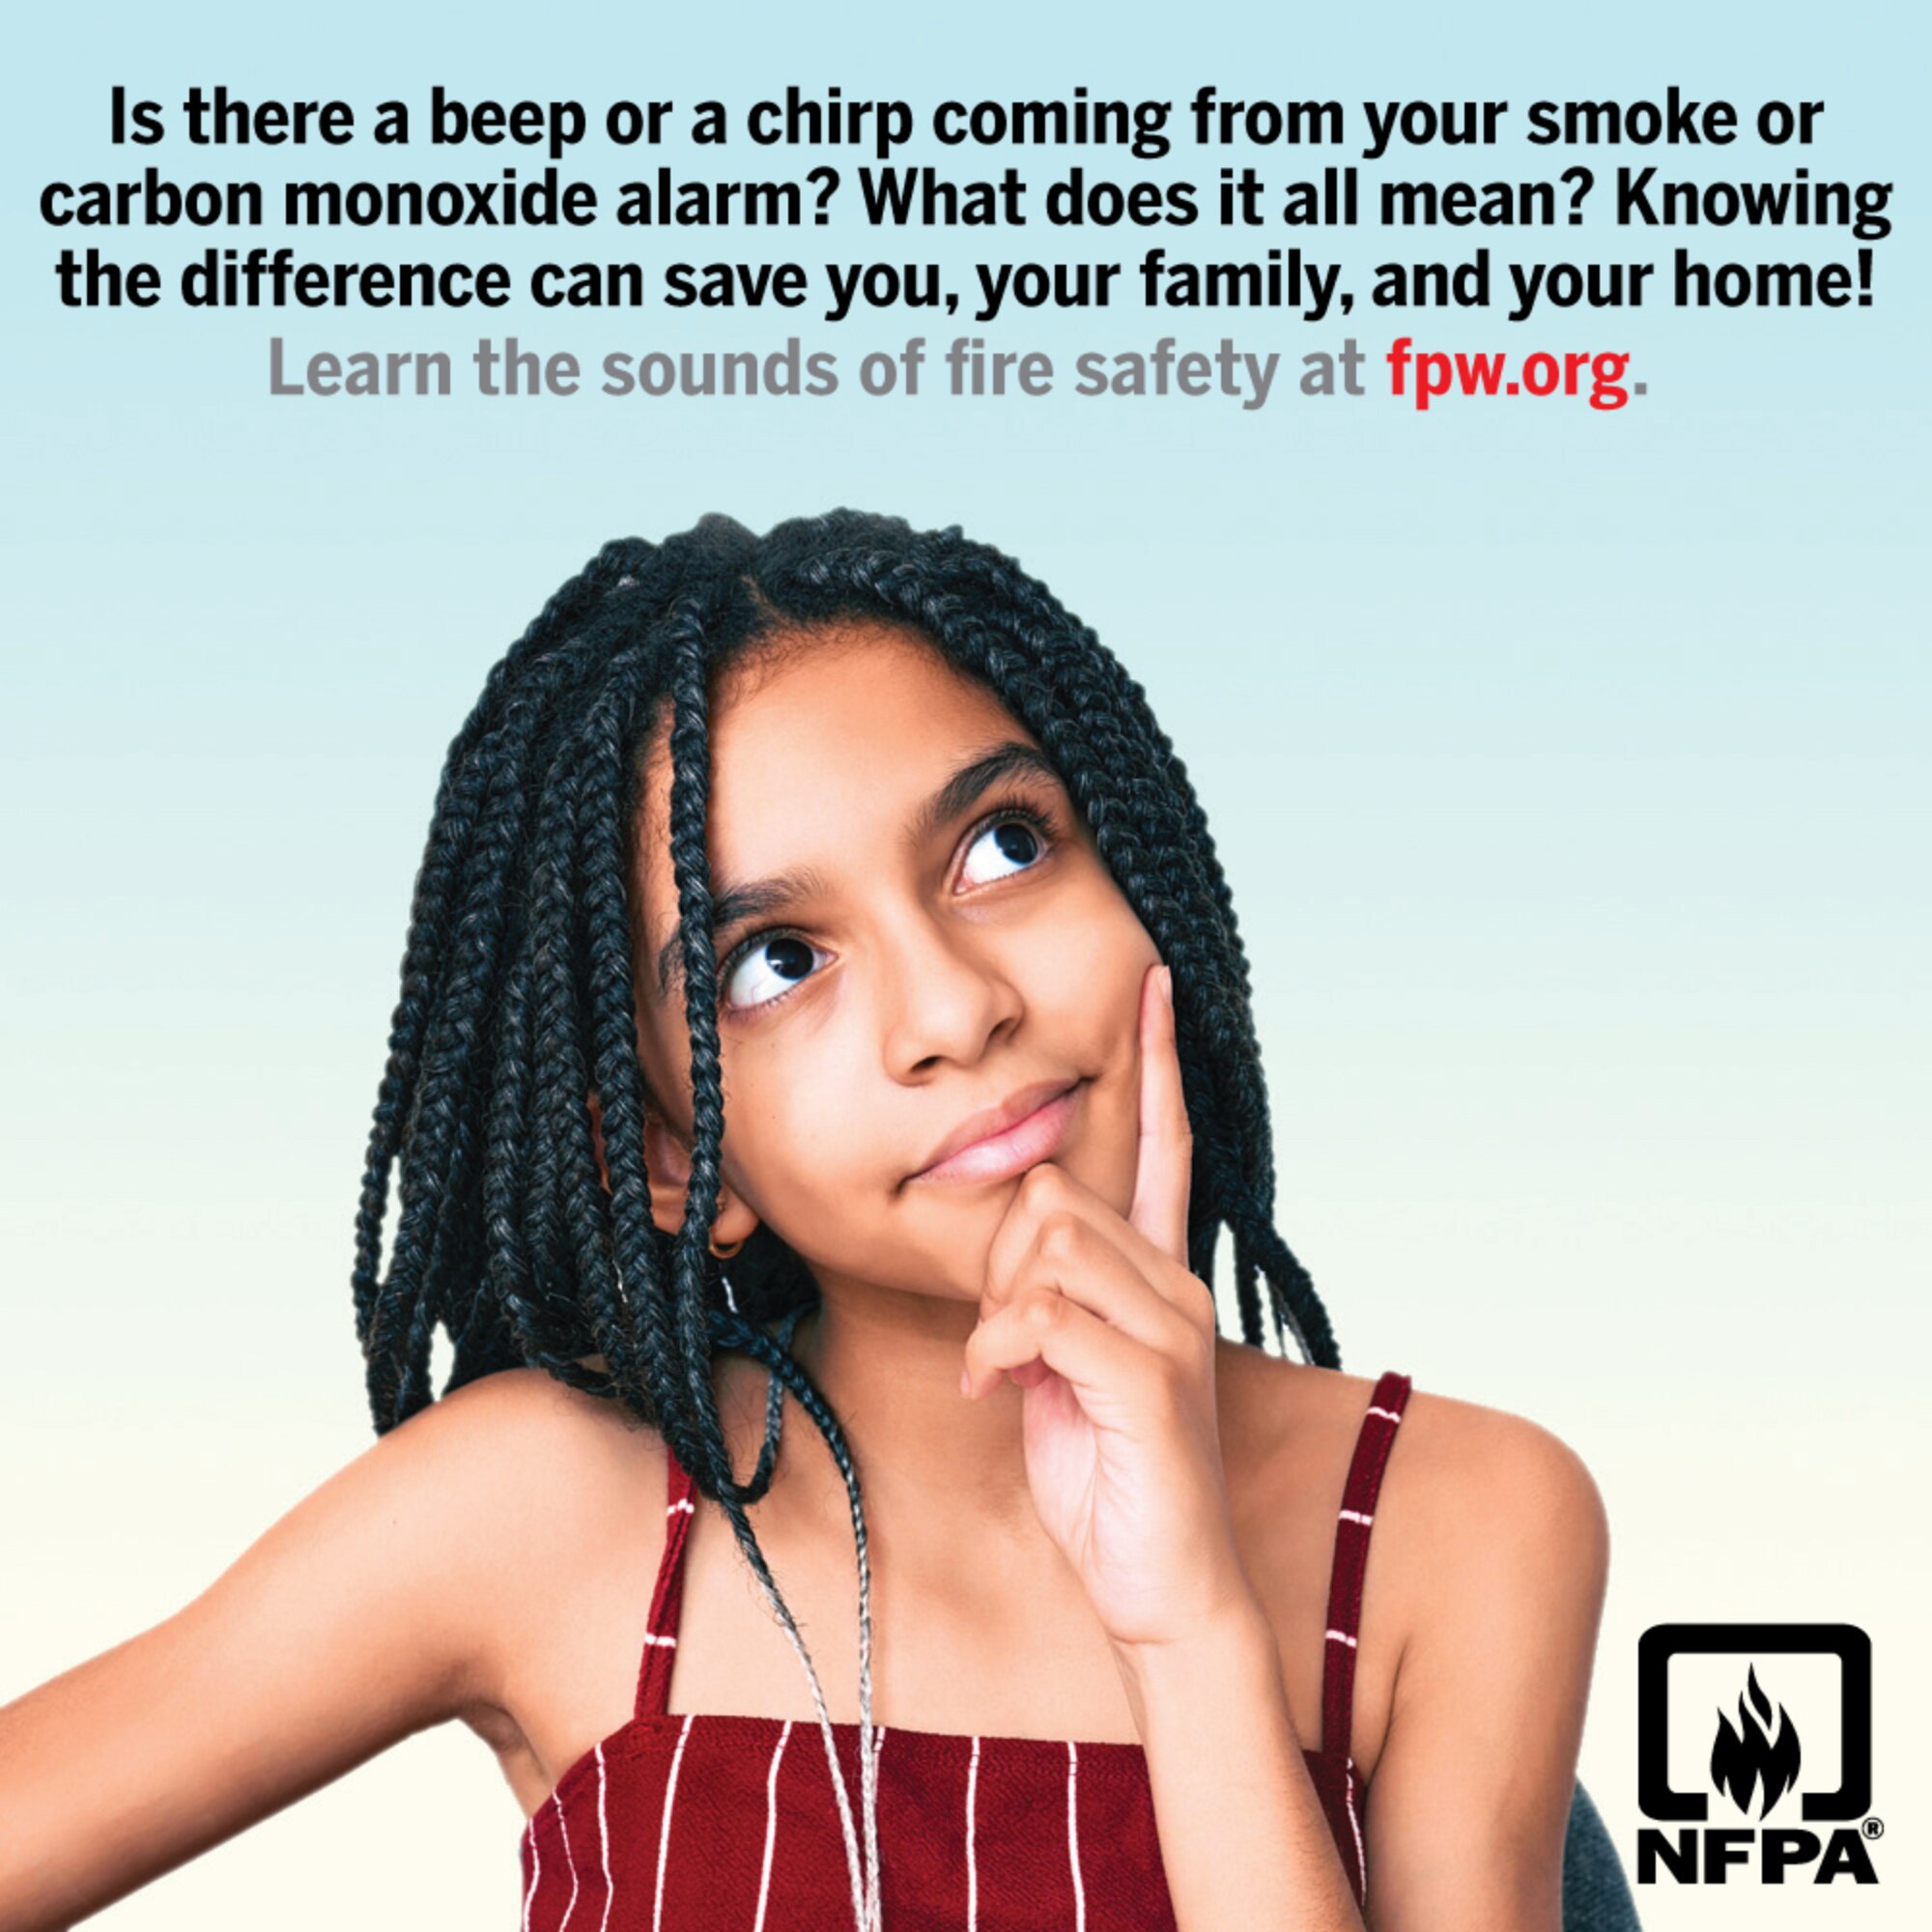 JBSA Fire Department reminds residents to ‘Learn the Sounds of Fire Safety’